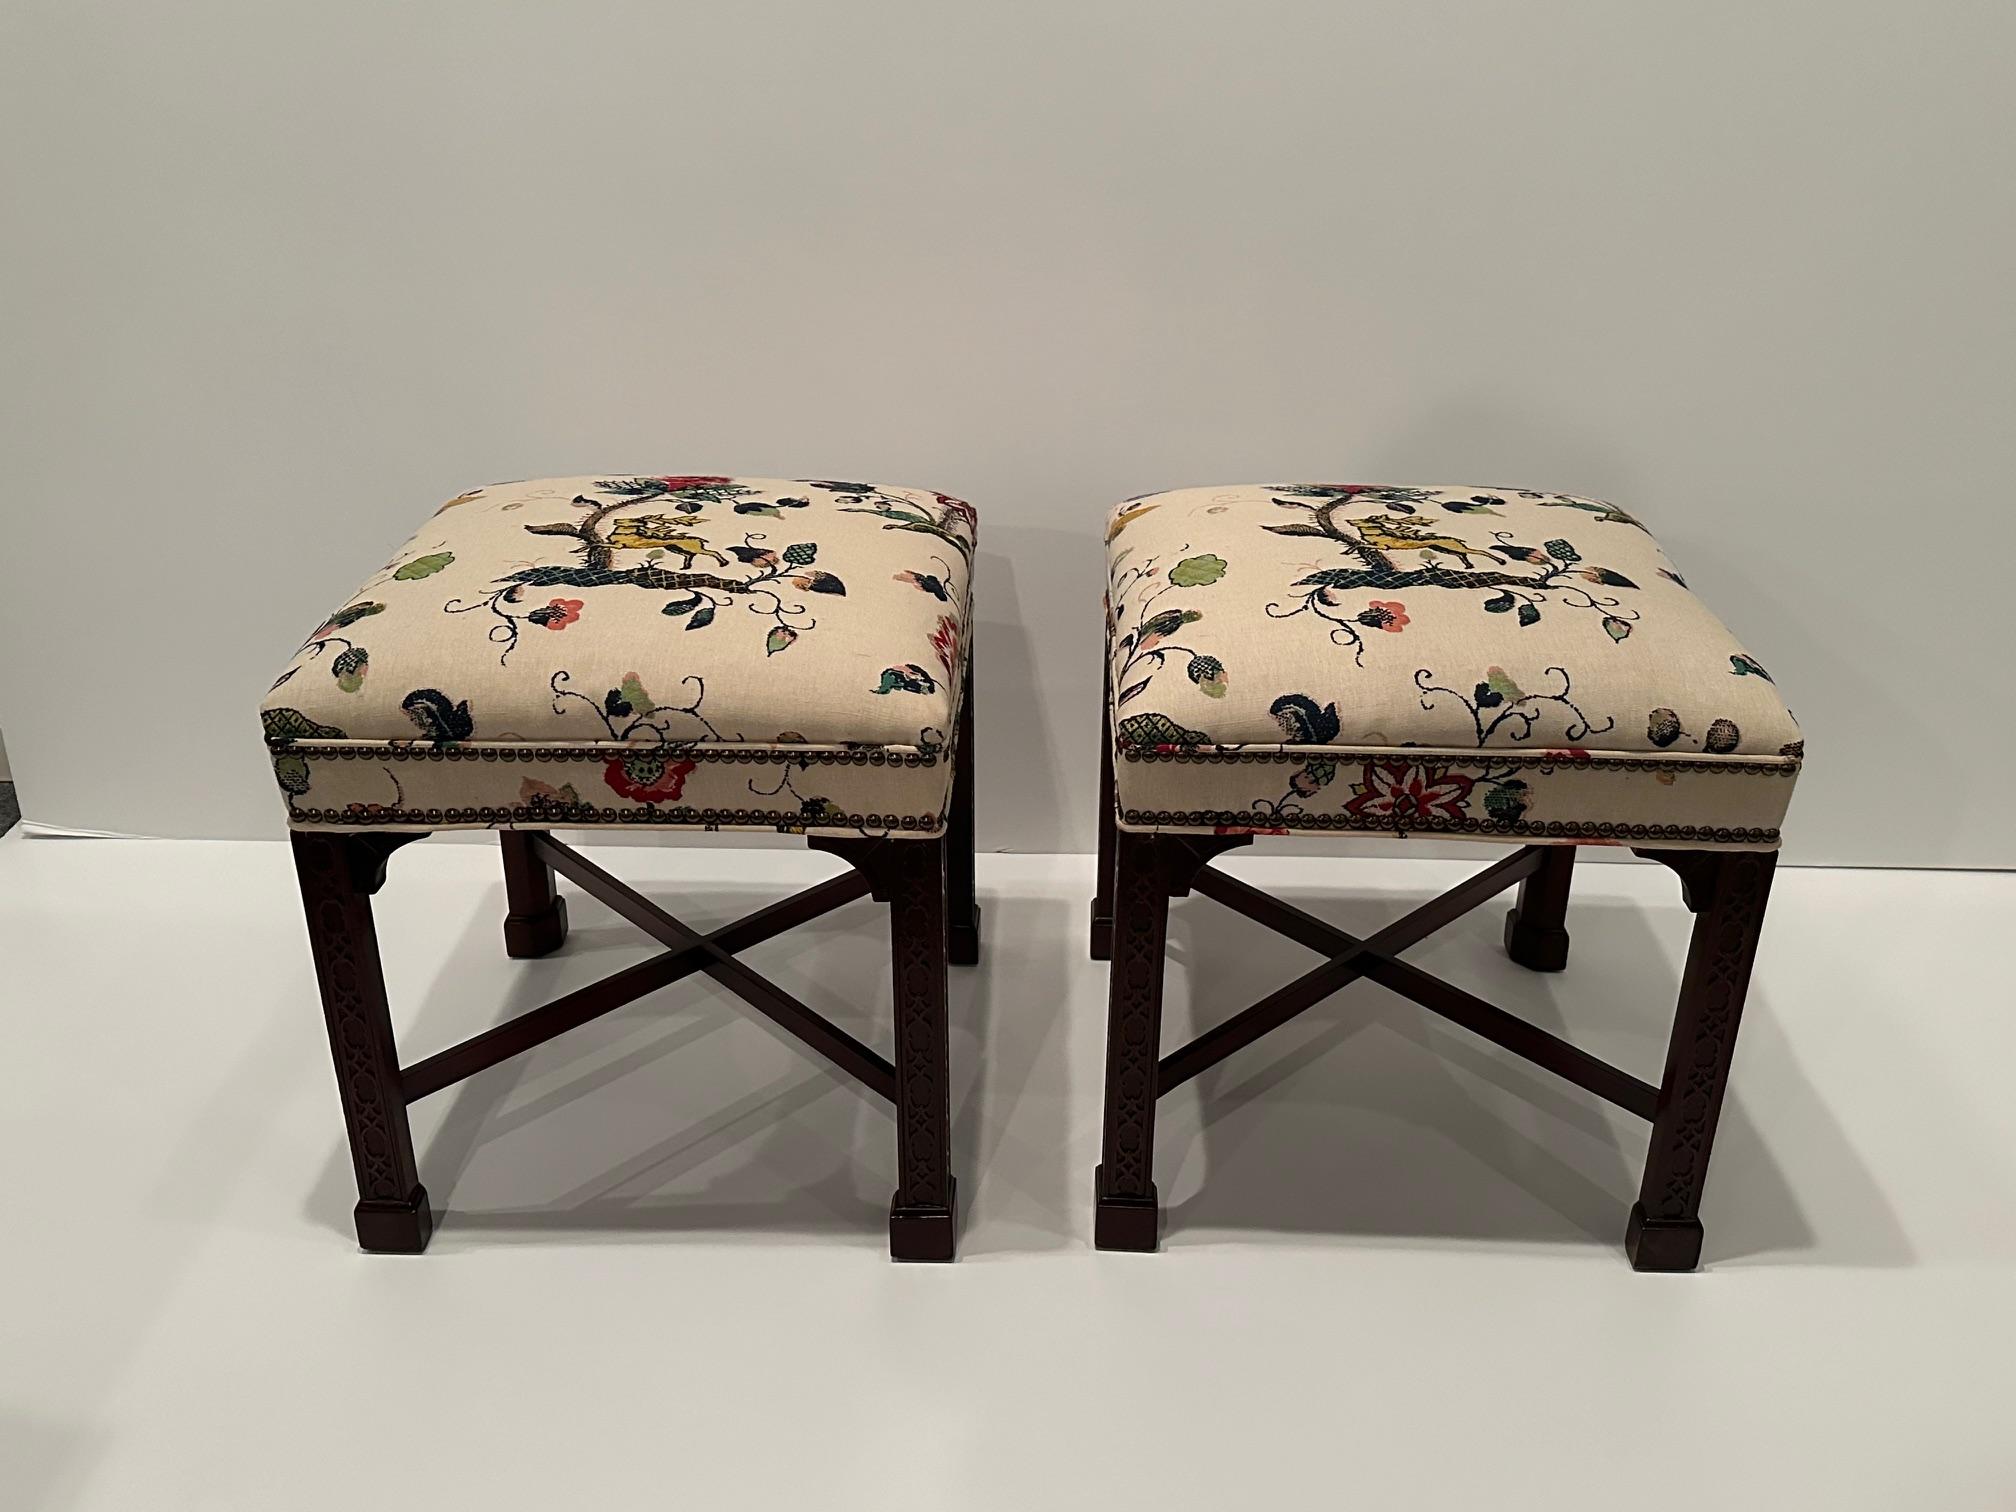 Upholstery Lovely Pair of Vintage Chinese Chippendale Style Benches Upholstered in Lee Jofa For Sale